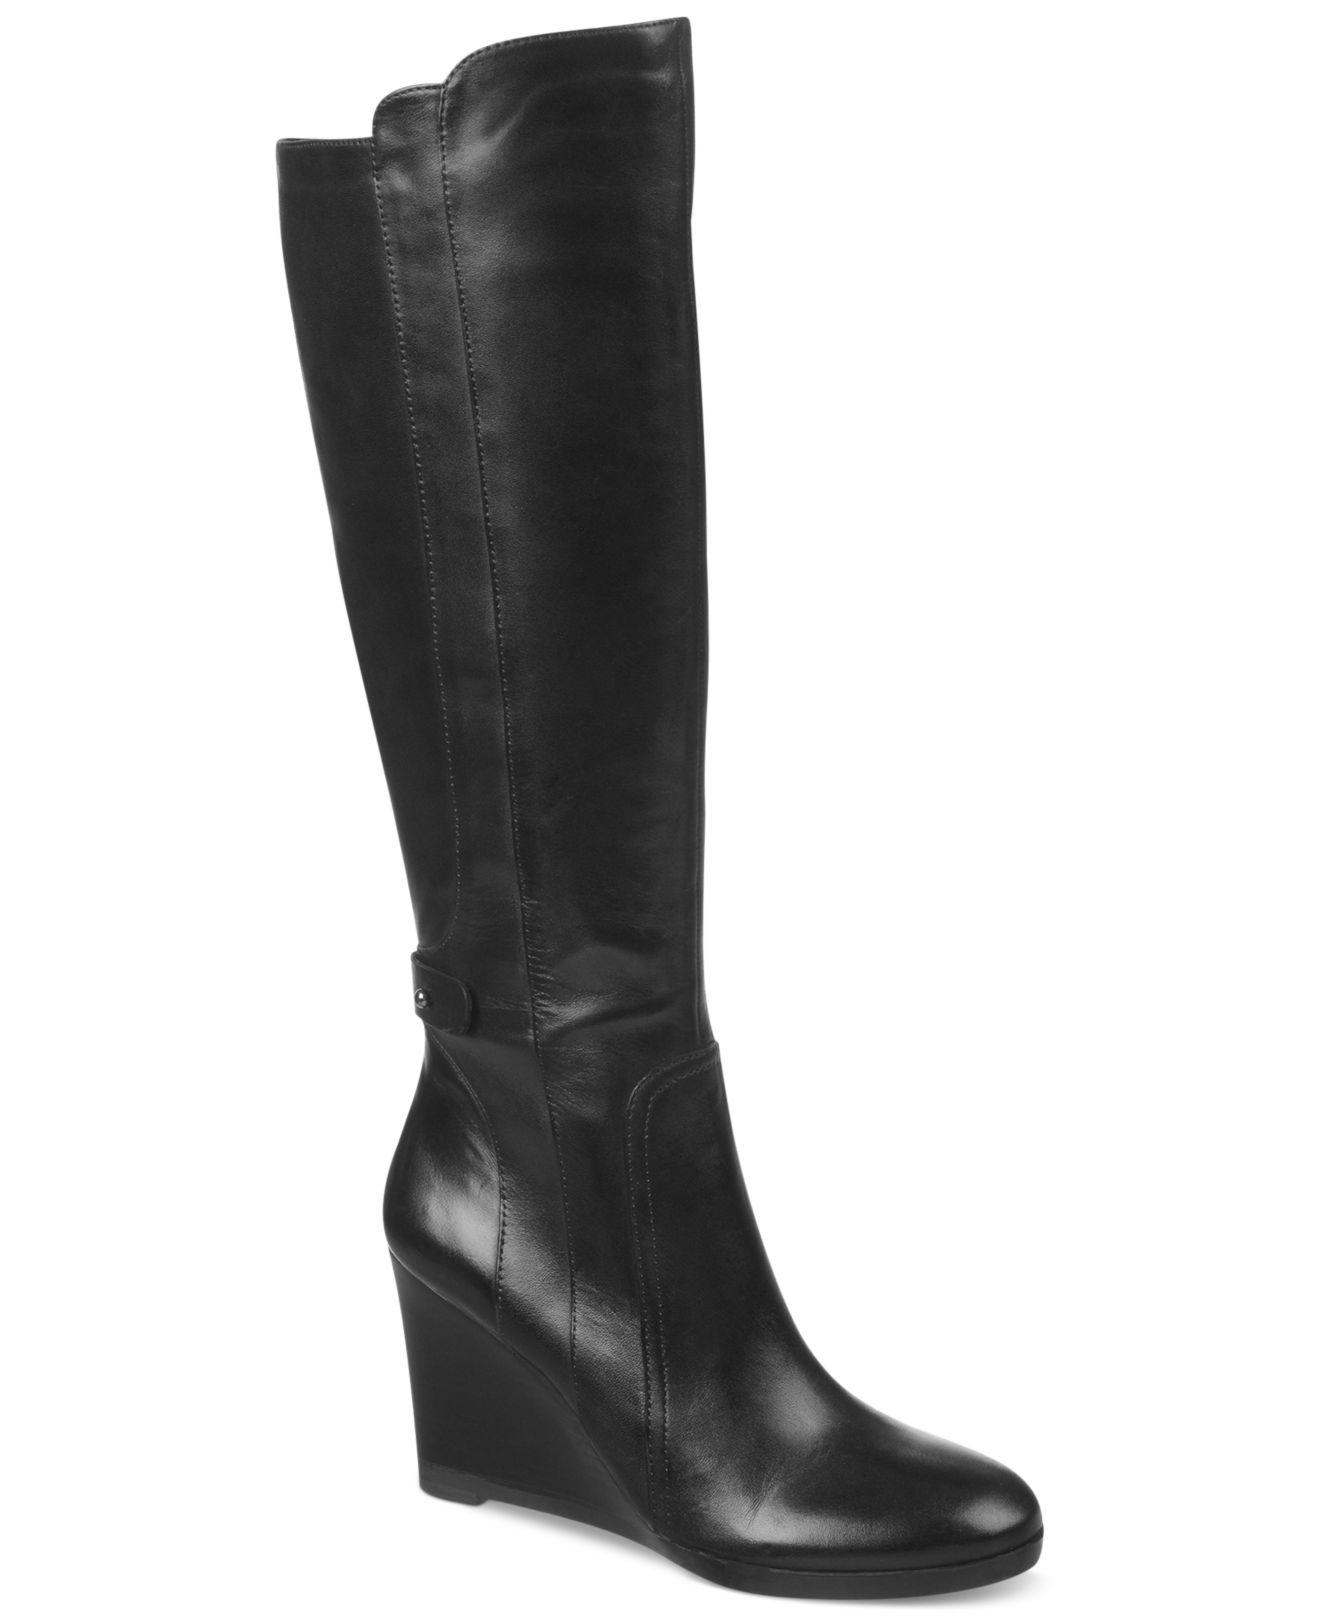 Franco sarto Walker Tall Wedge Boots in Black | Lyst